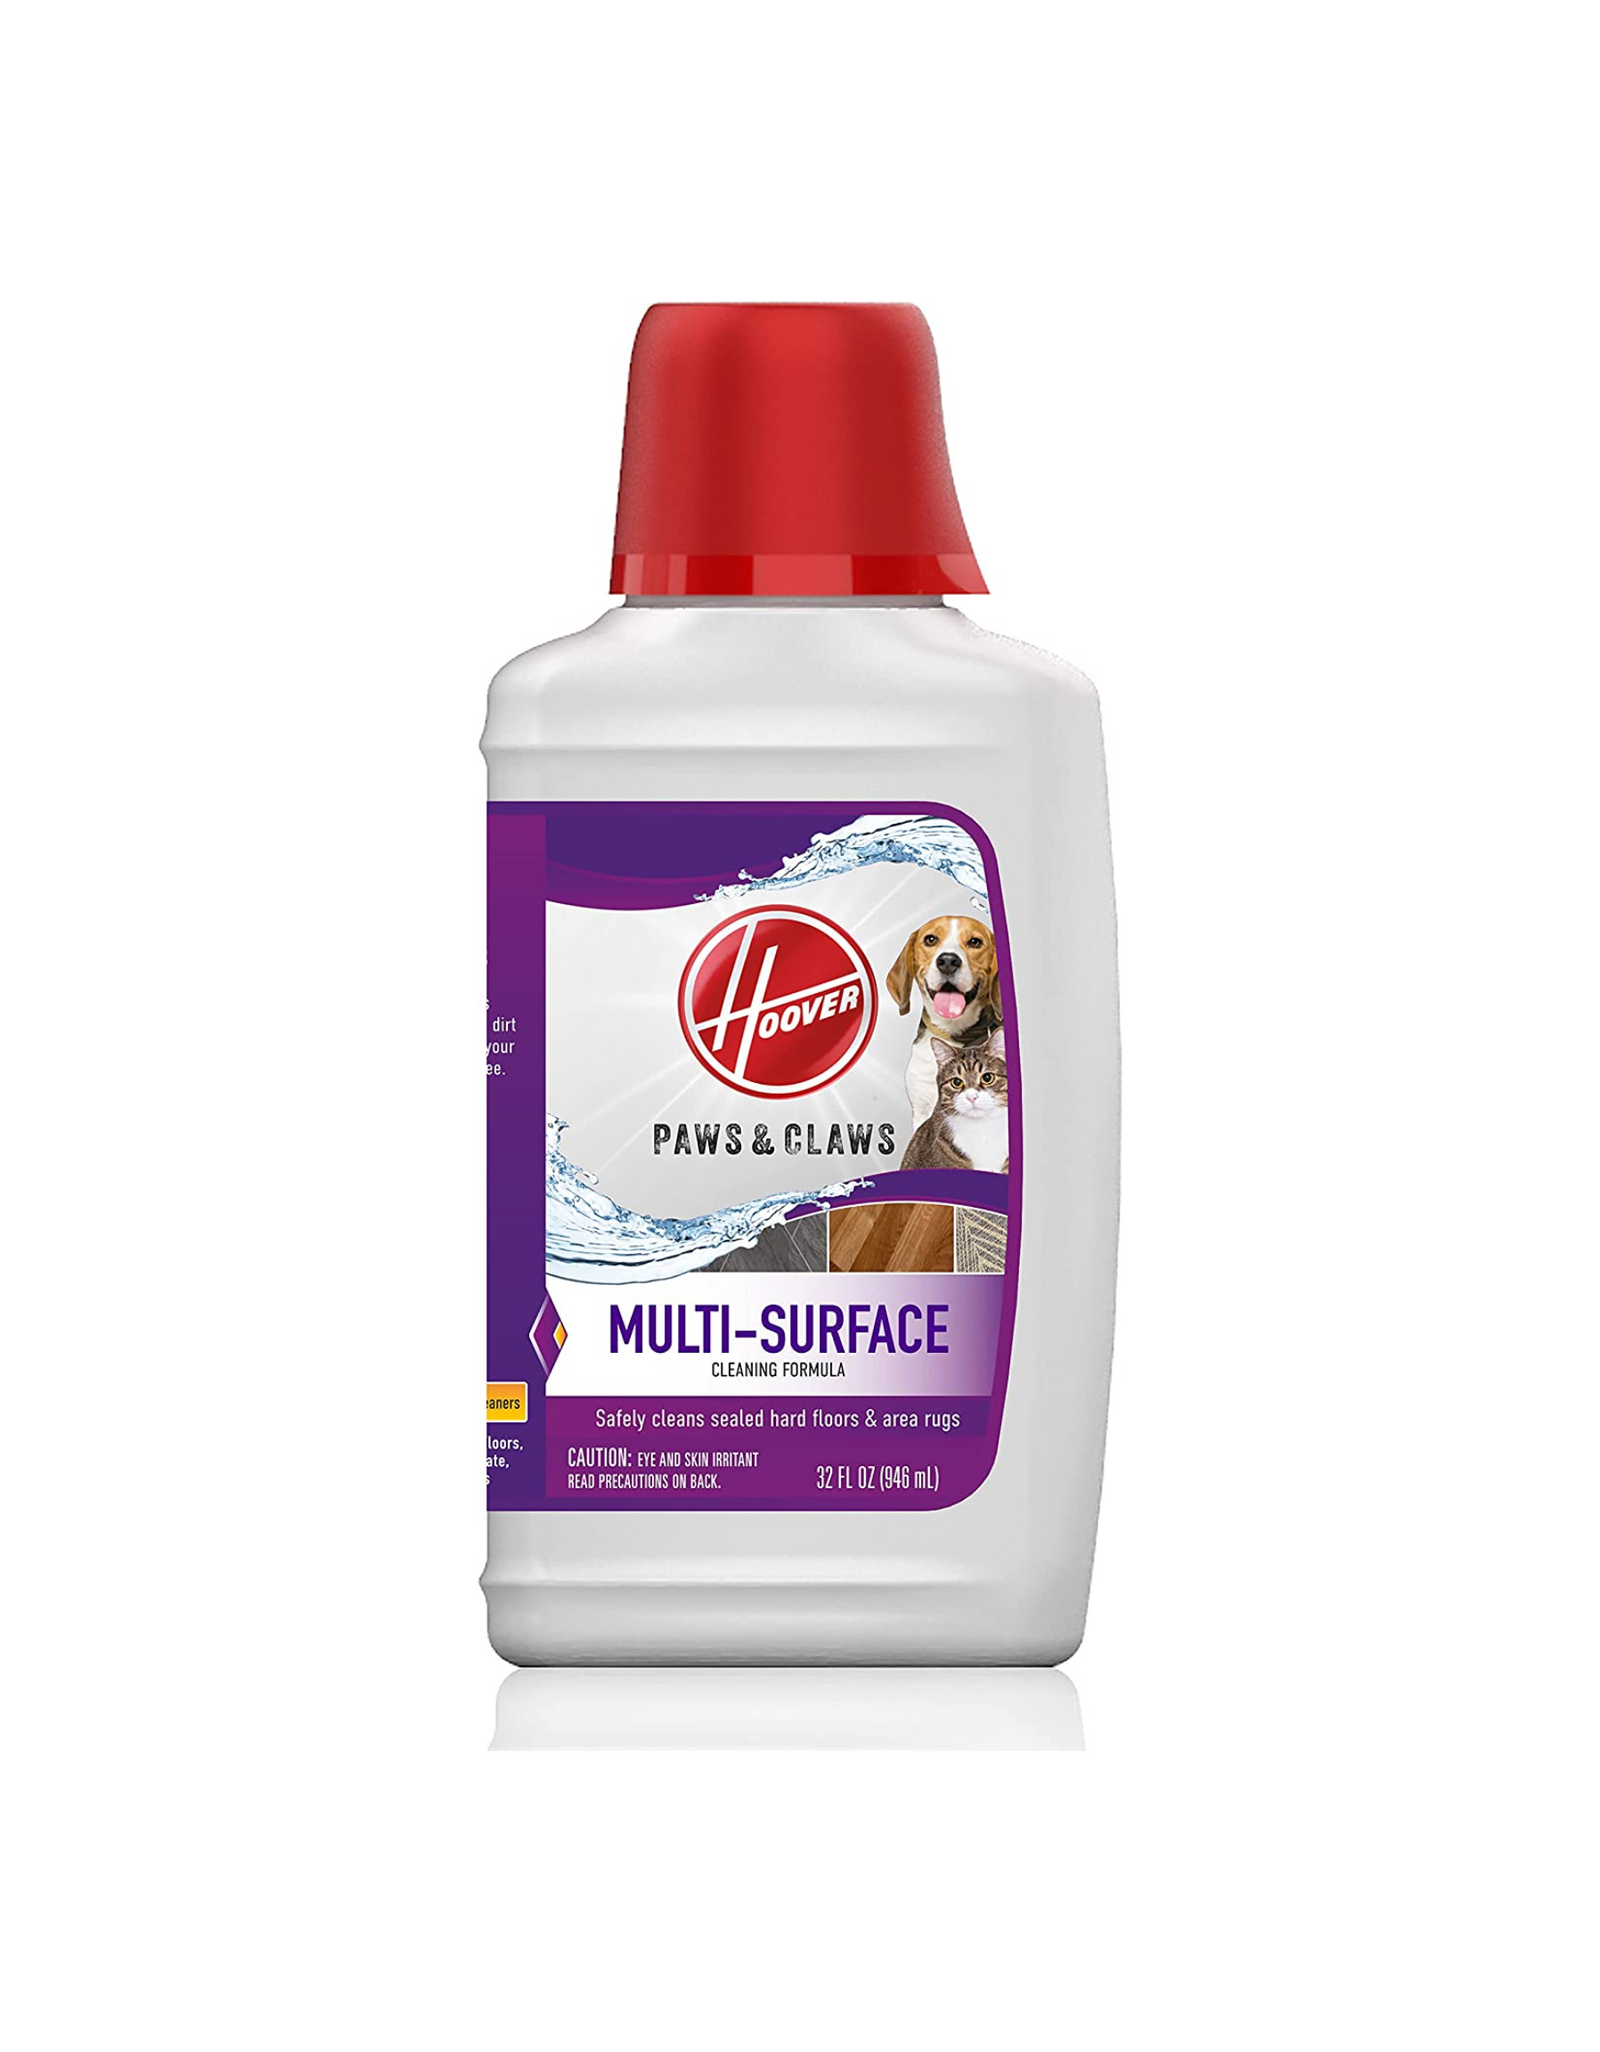 Hoover Paws & Claws Hard Surface Floor Cleaner AH30429, 32 fl oz, White